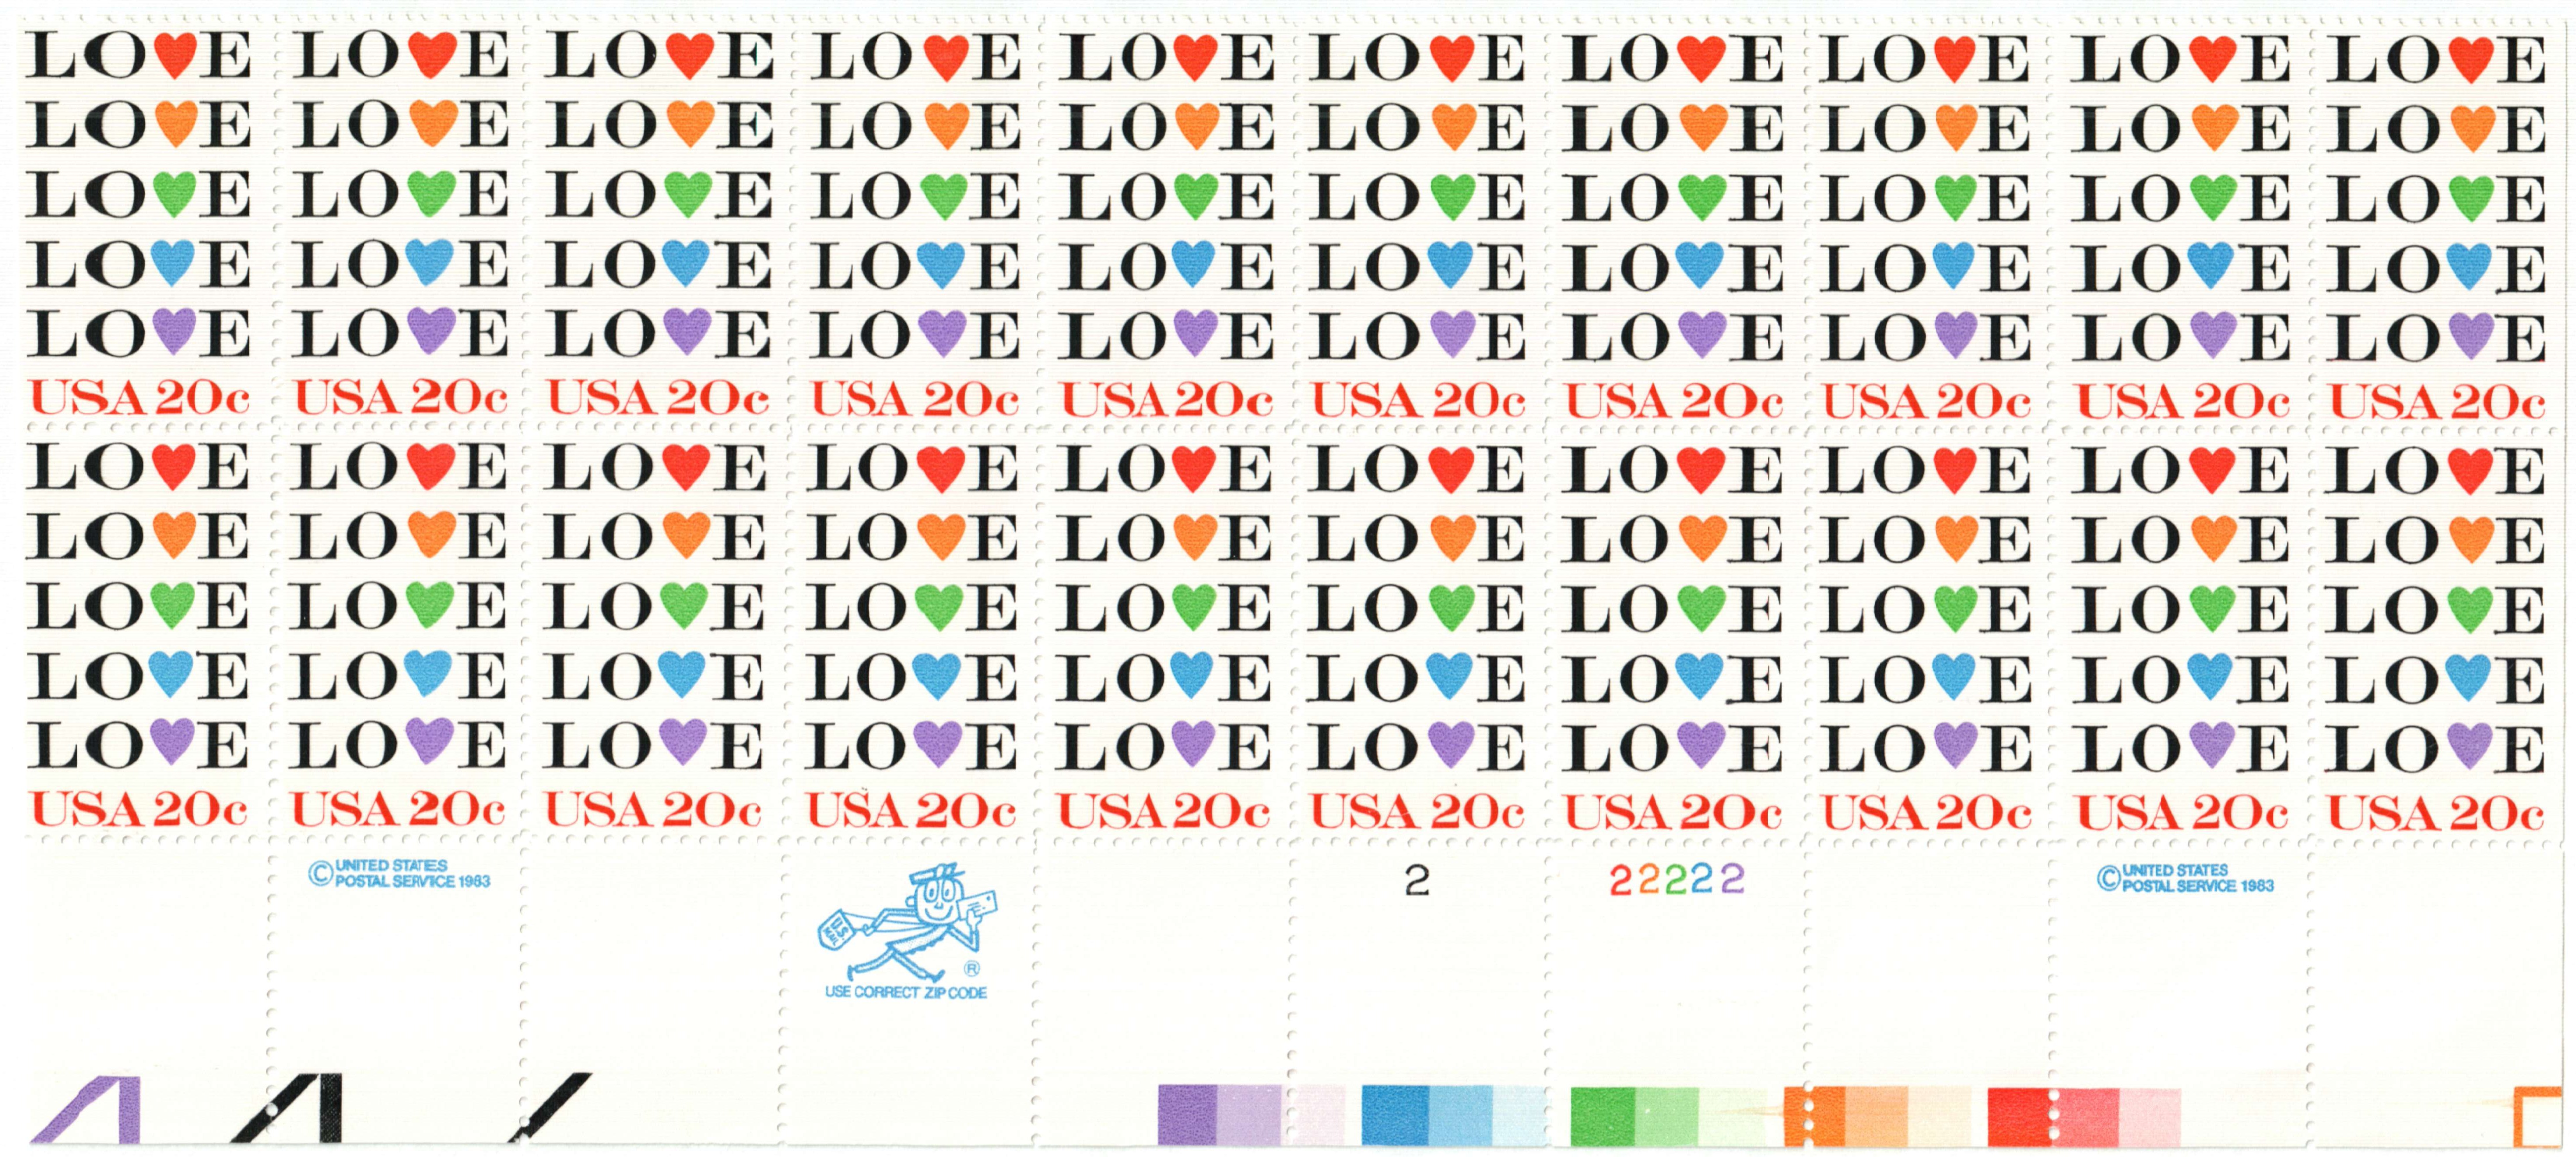 10 Love Rainbow Heart Stamps, 20 Cent 1984 Unused Postage Stamps, Colorful  Hearts 